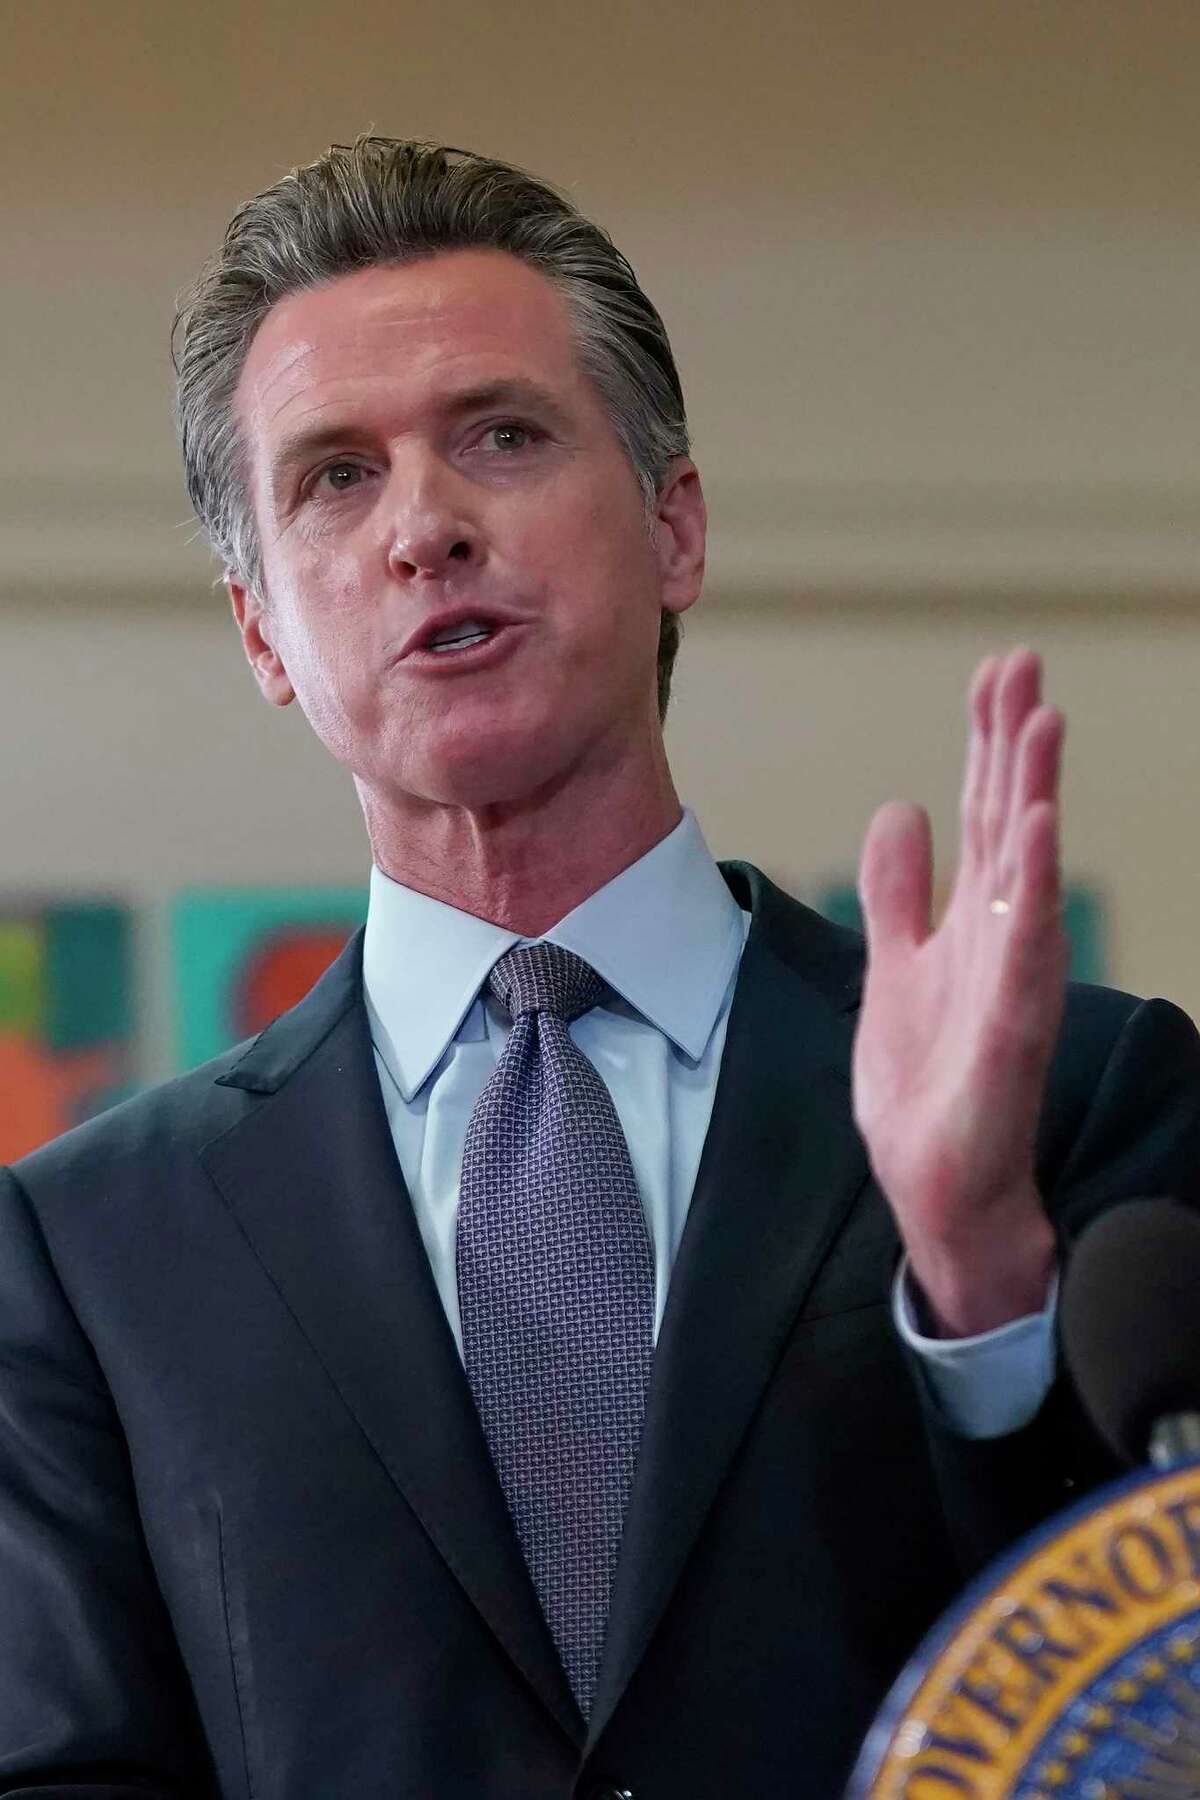 A new law signed by Gov. Gavin Newsom applies to damages that can be claimed by survivors of victims of assault, medical mistreatment or other wrongfully inflicted harm in California. For the first time they can seek damages for all harm caused by injuries to the victim — including pain, suffering and disfigurement — as well as economic losses.